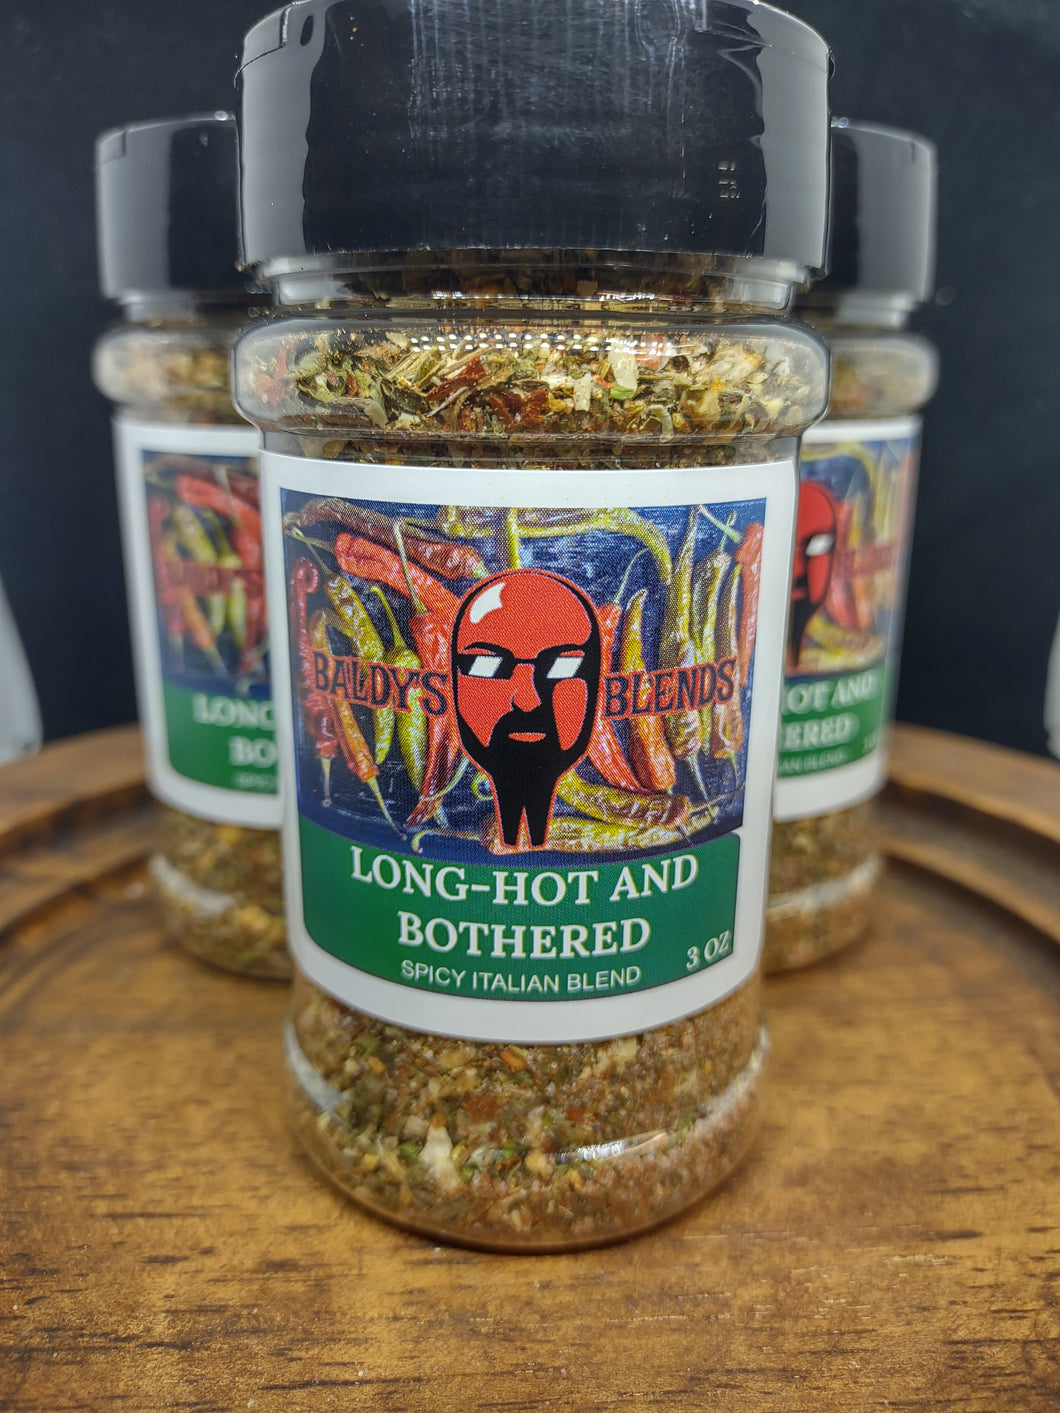 Long-Hot and Bothered (Spicy Italian Blend)